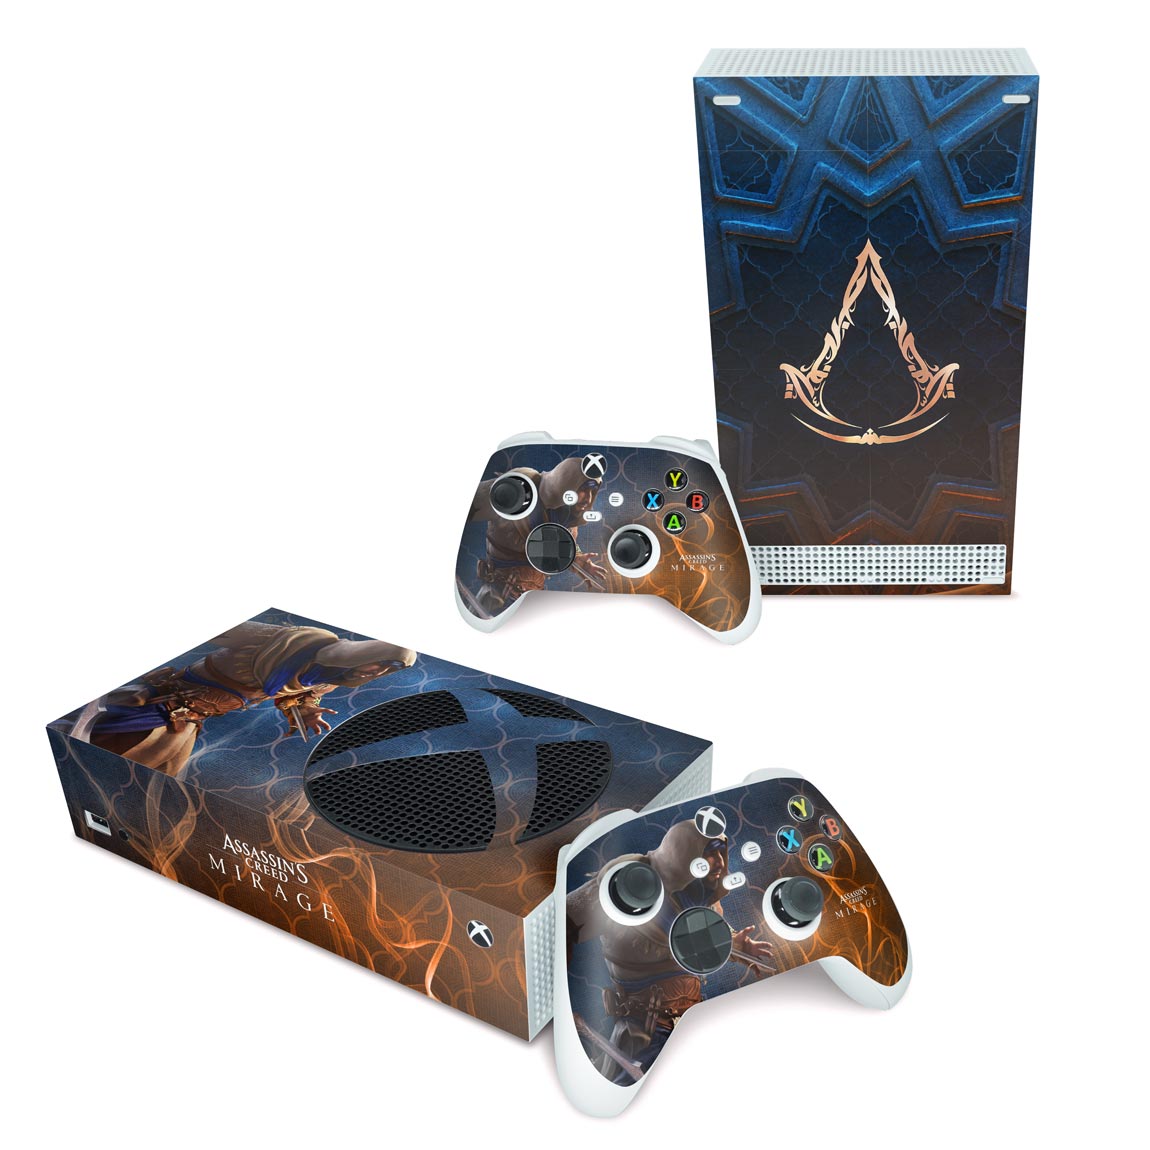 Assassin's Creed Mirage - Xbox Series X/S